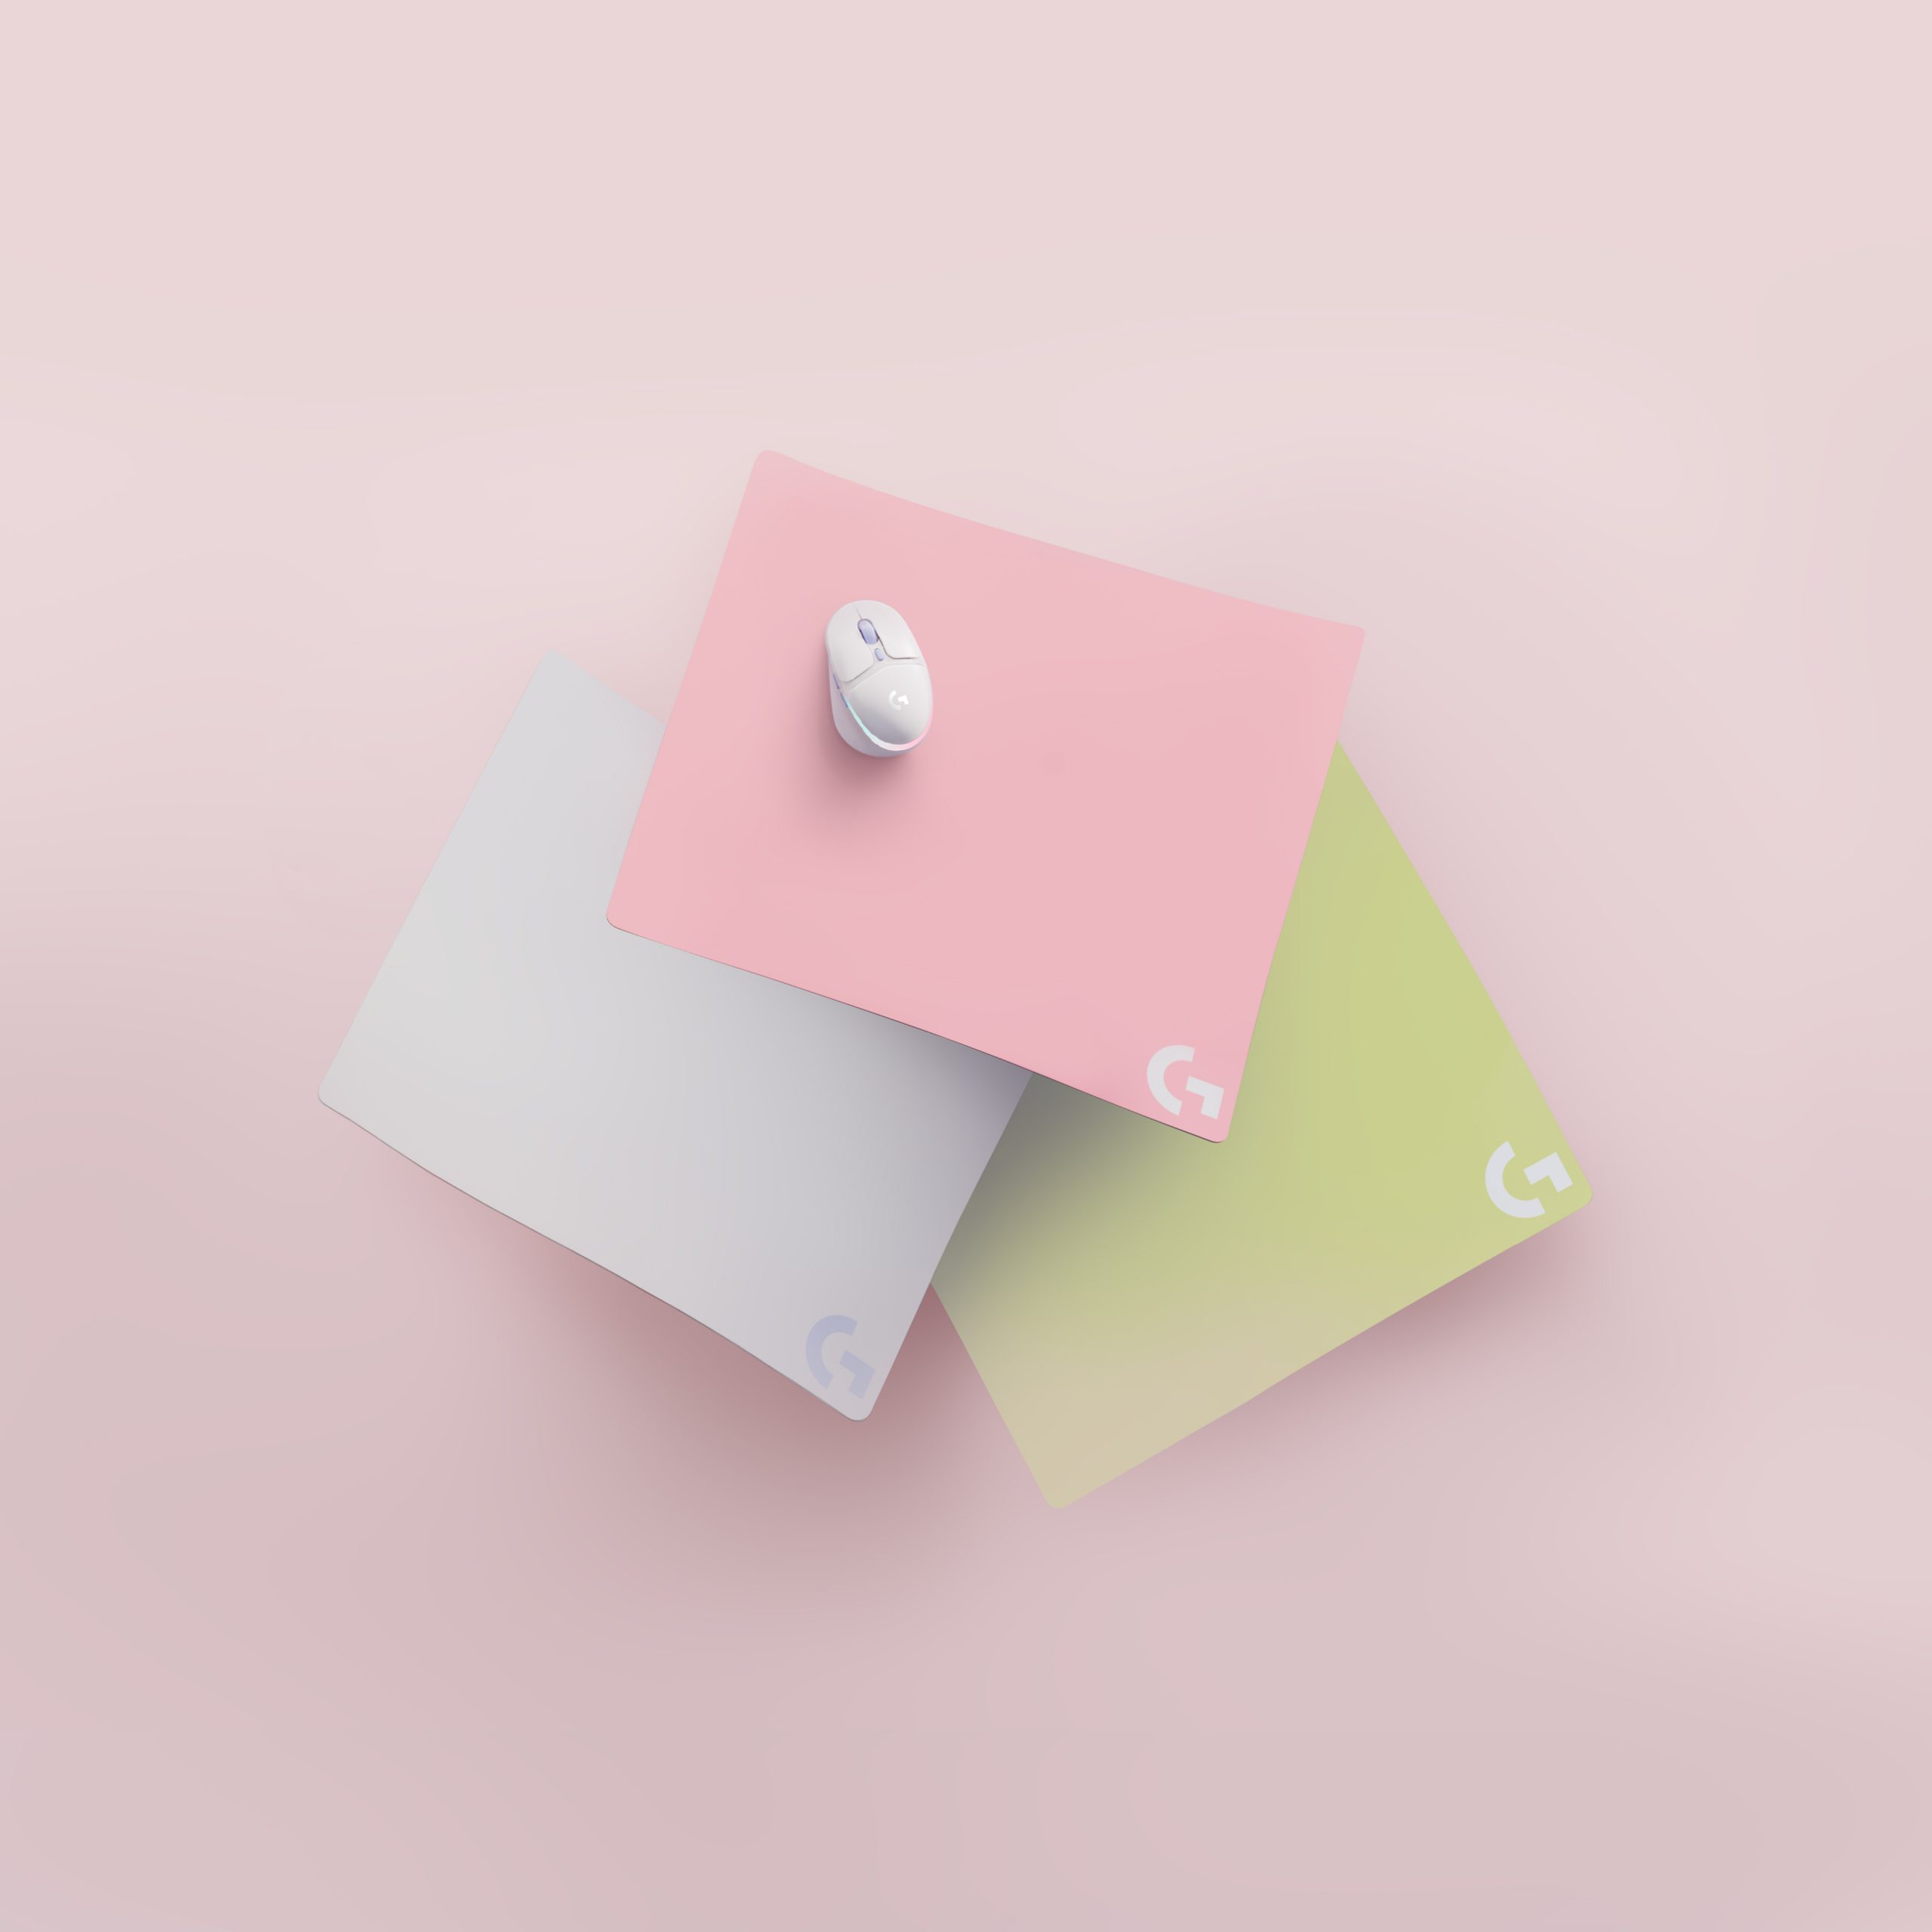 Gem-Collection-Accessories-Pink-Green-White-Mouse-Pad-G705-Product-CG-1×1-1